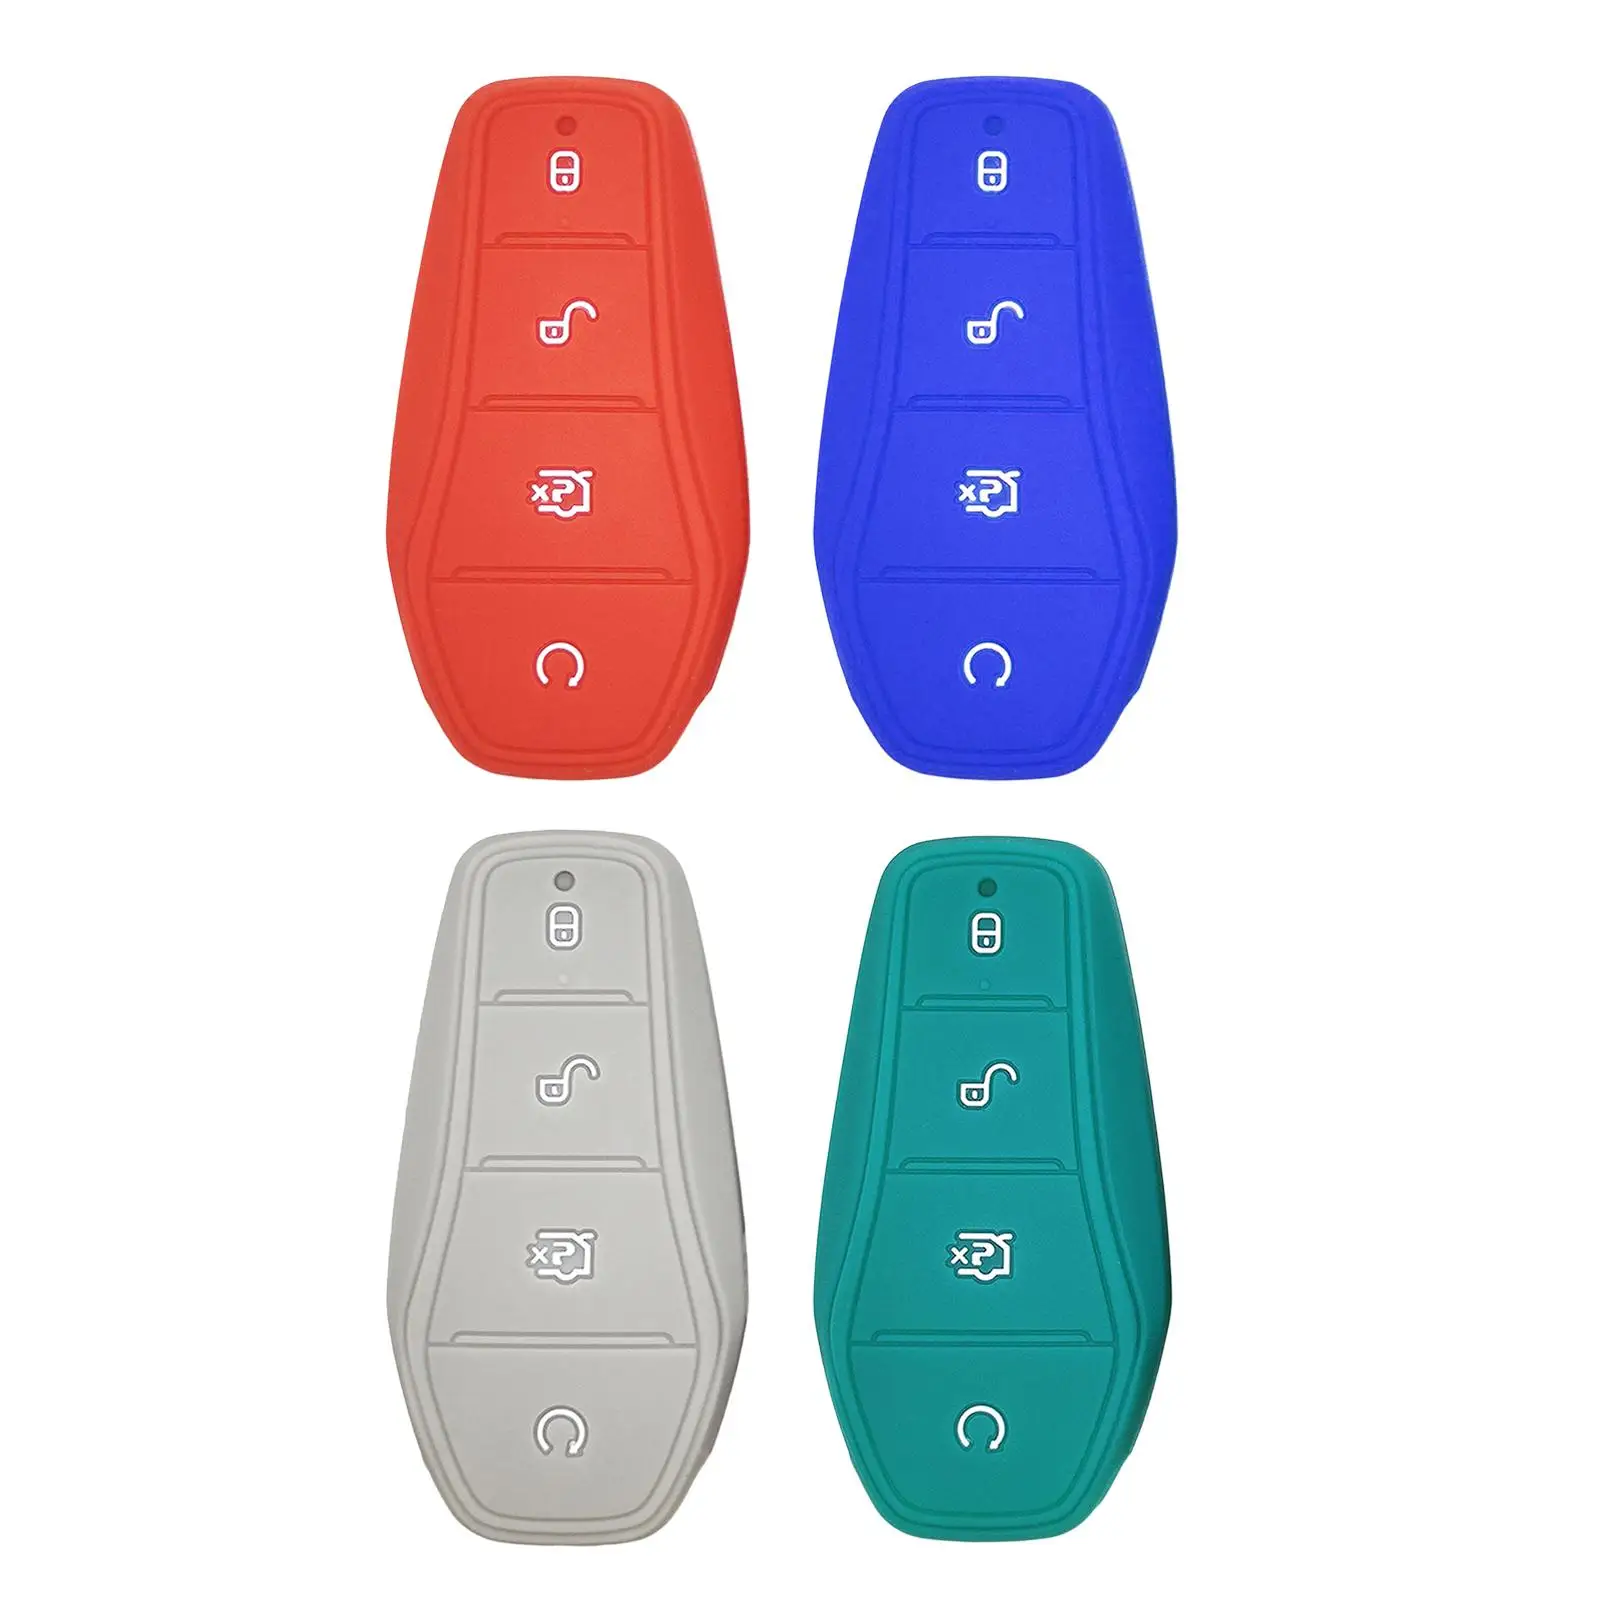 

Silicone Car Entry Remote Control Key Fob Cover Case Car Key Case Cover for BYD Atto 3 Qin Plus I Don Dm